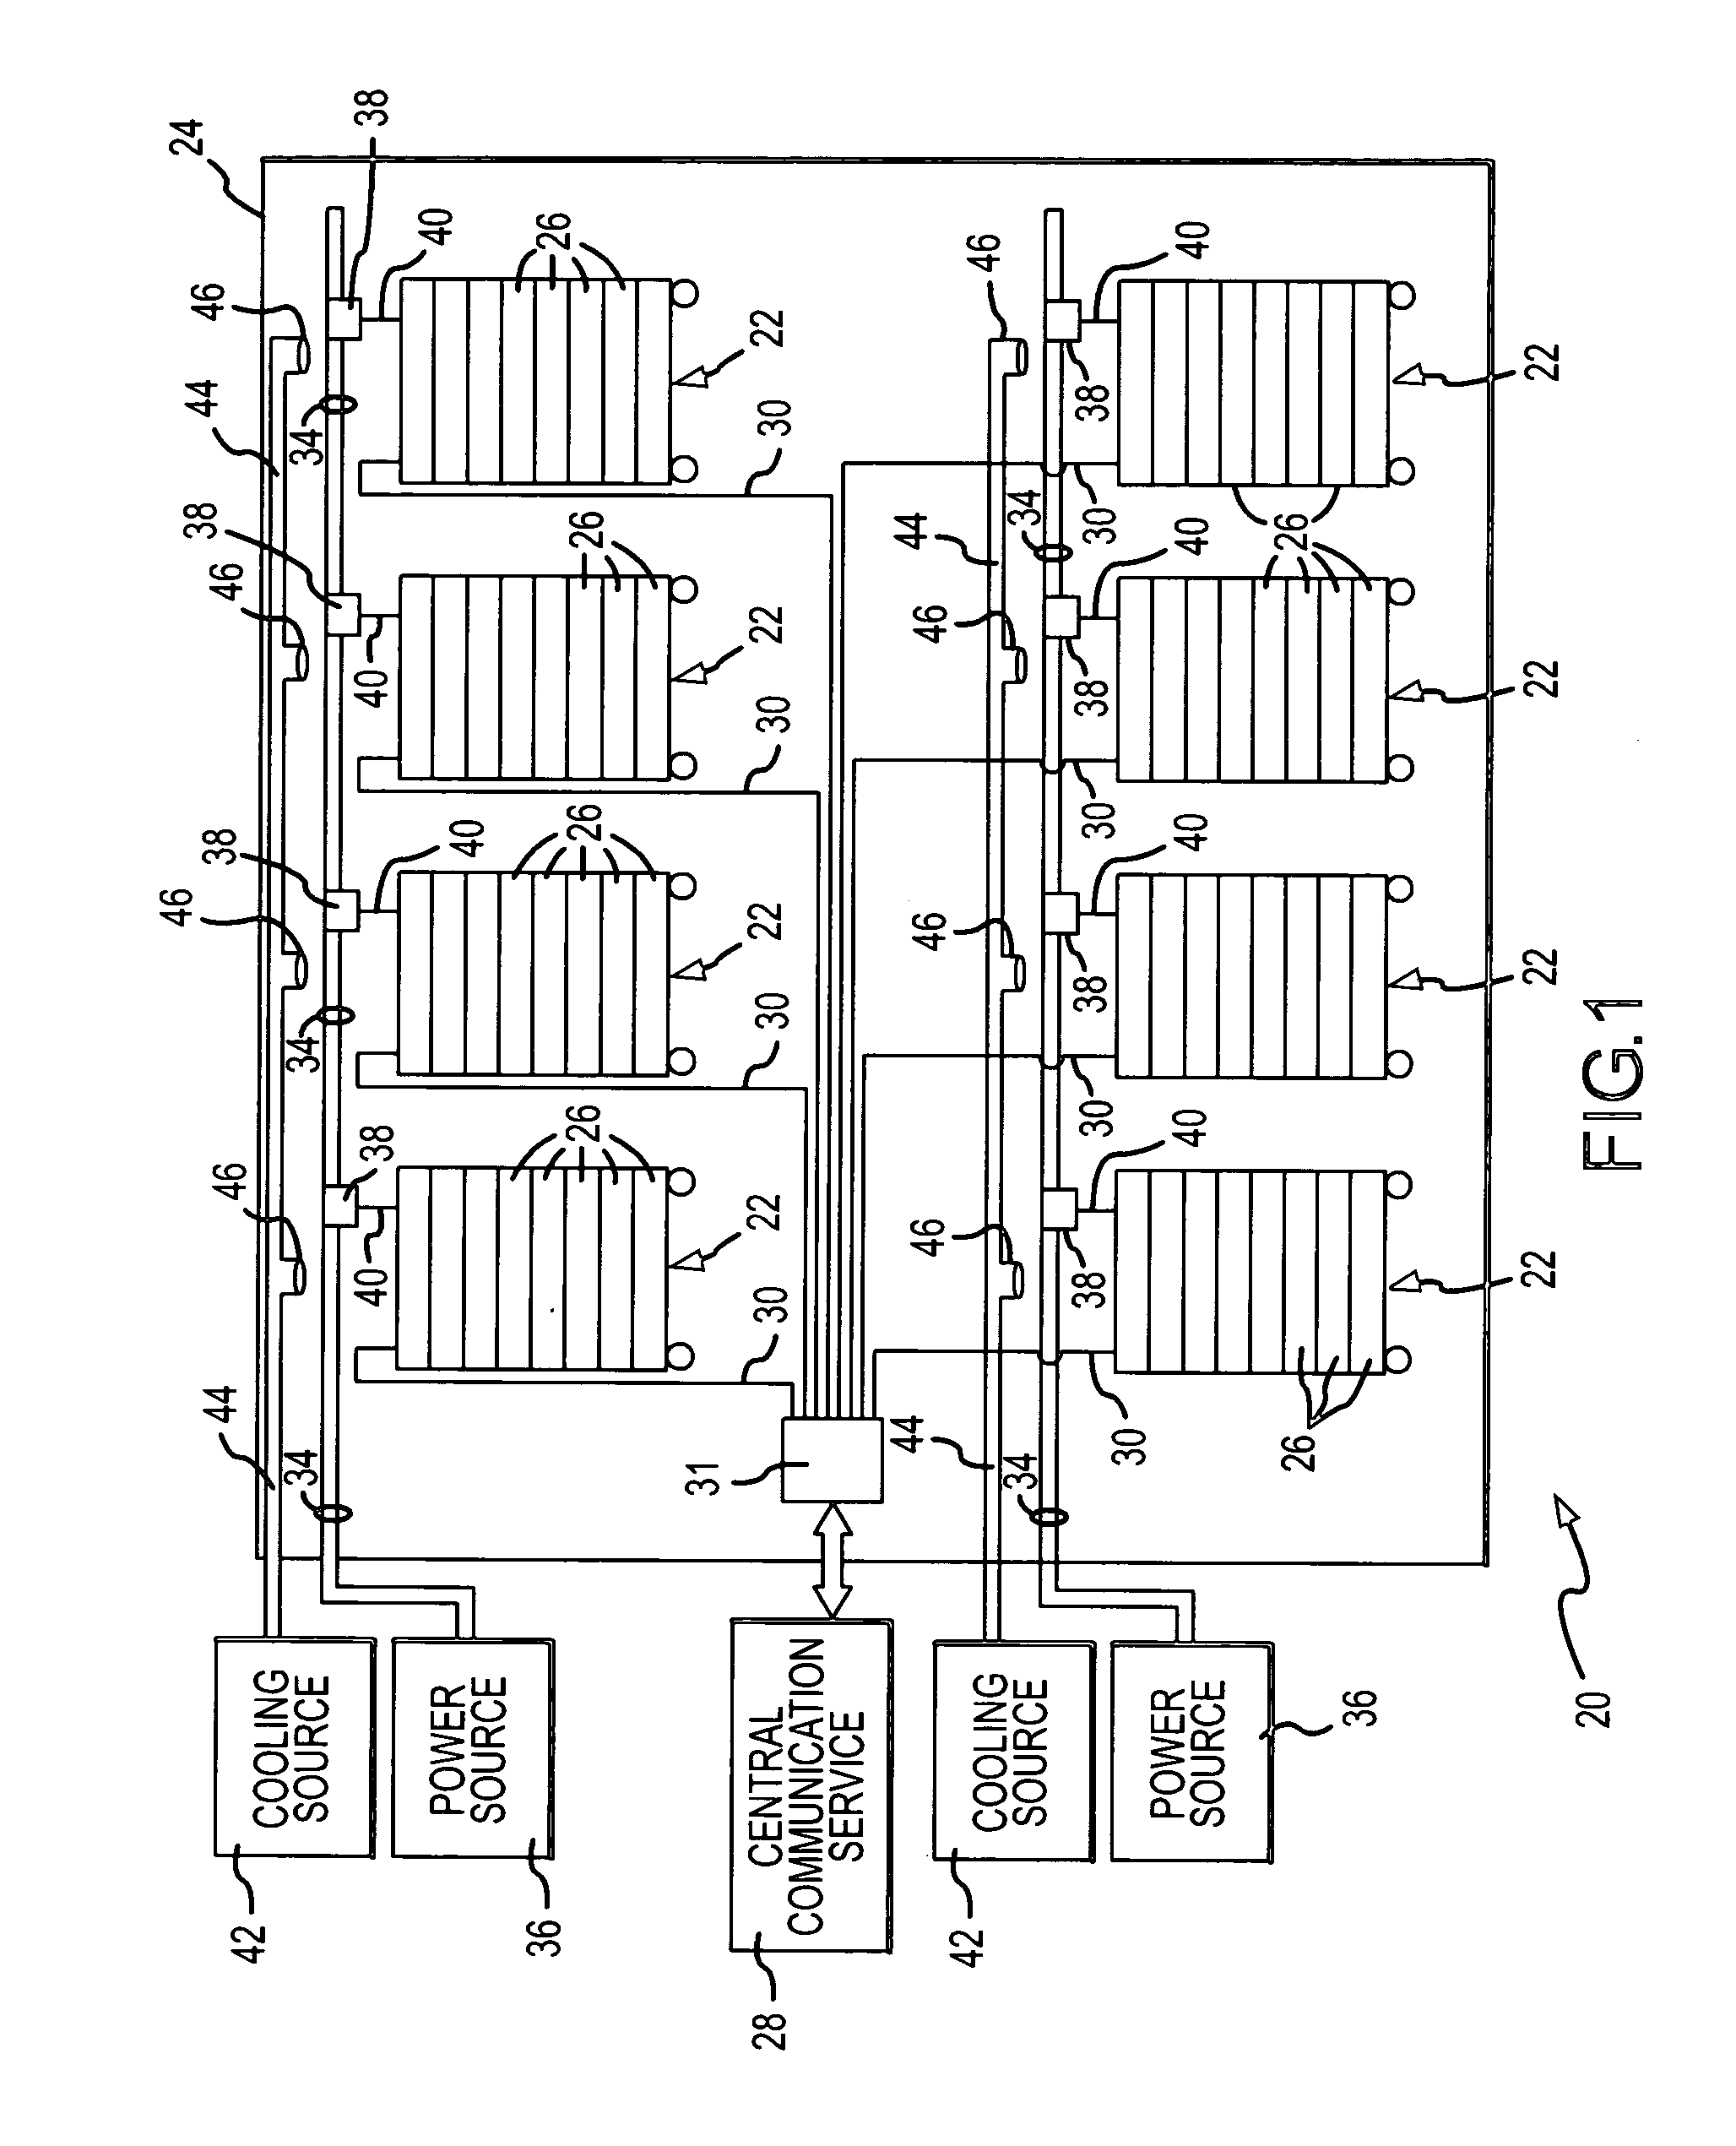 Data center with mobile data cabinets and method of mobilizing and connecting data processing devices in a data center using consolidated data communications and power connections